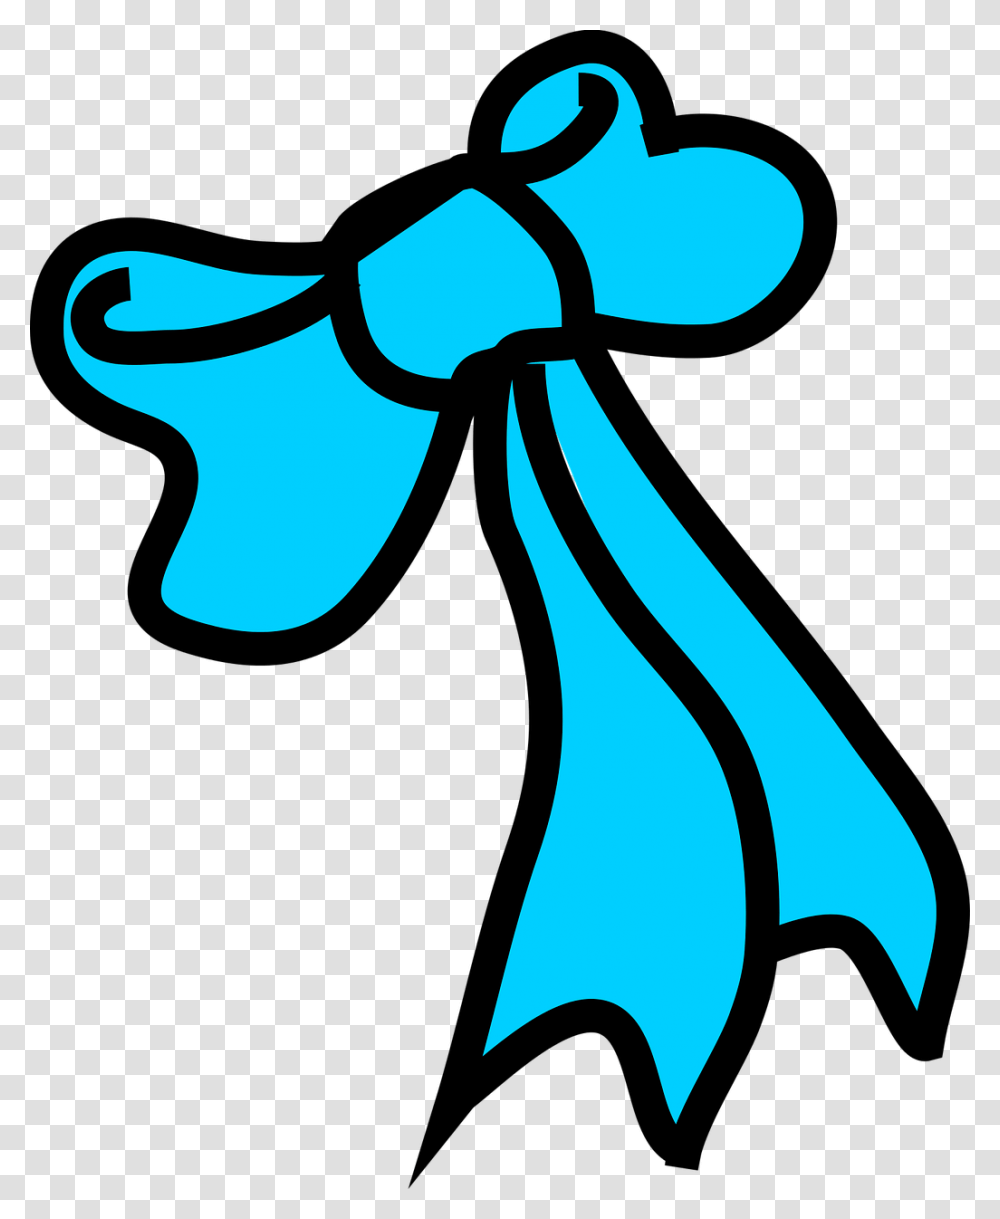 Bow Blue Christmas Free Vector Graphic On Pixabay Bow Blue Present, Tie, Accessories, Accessory, Necktie Transparent Png